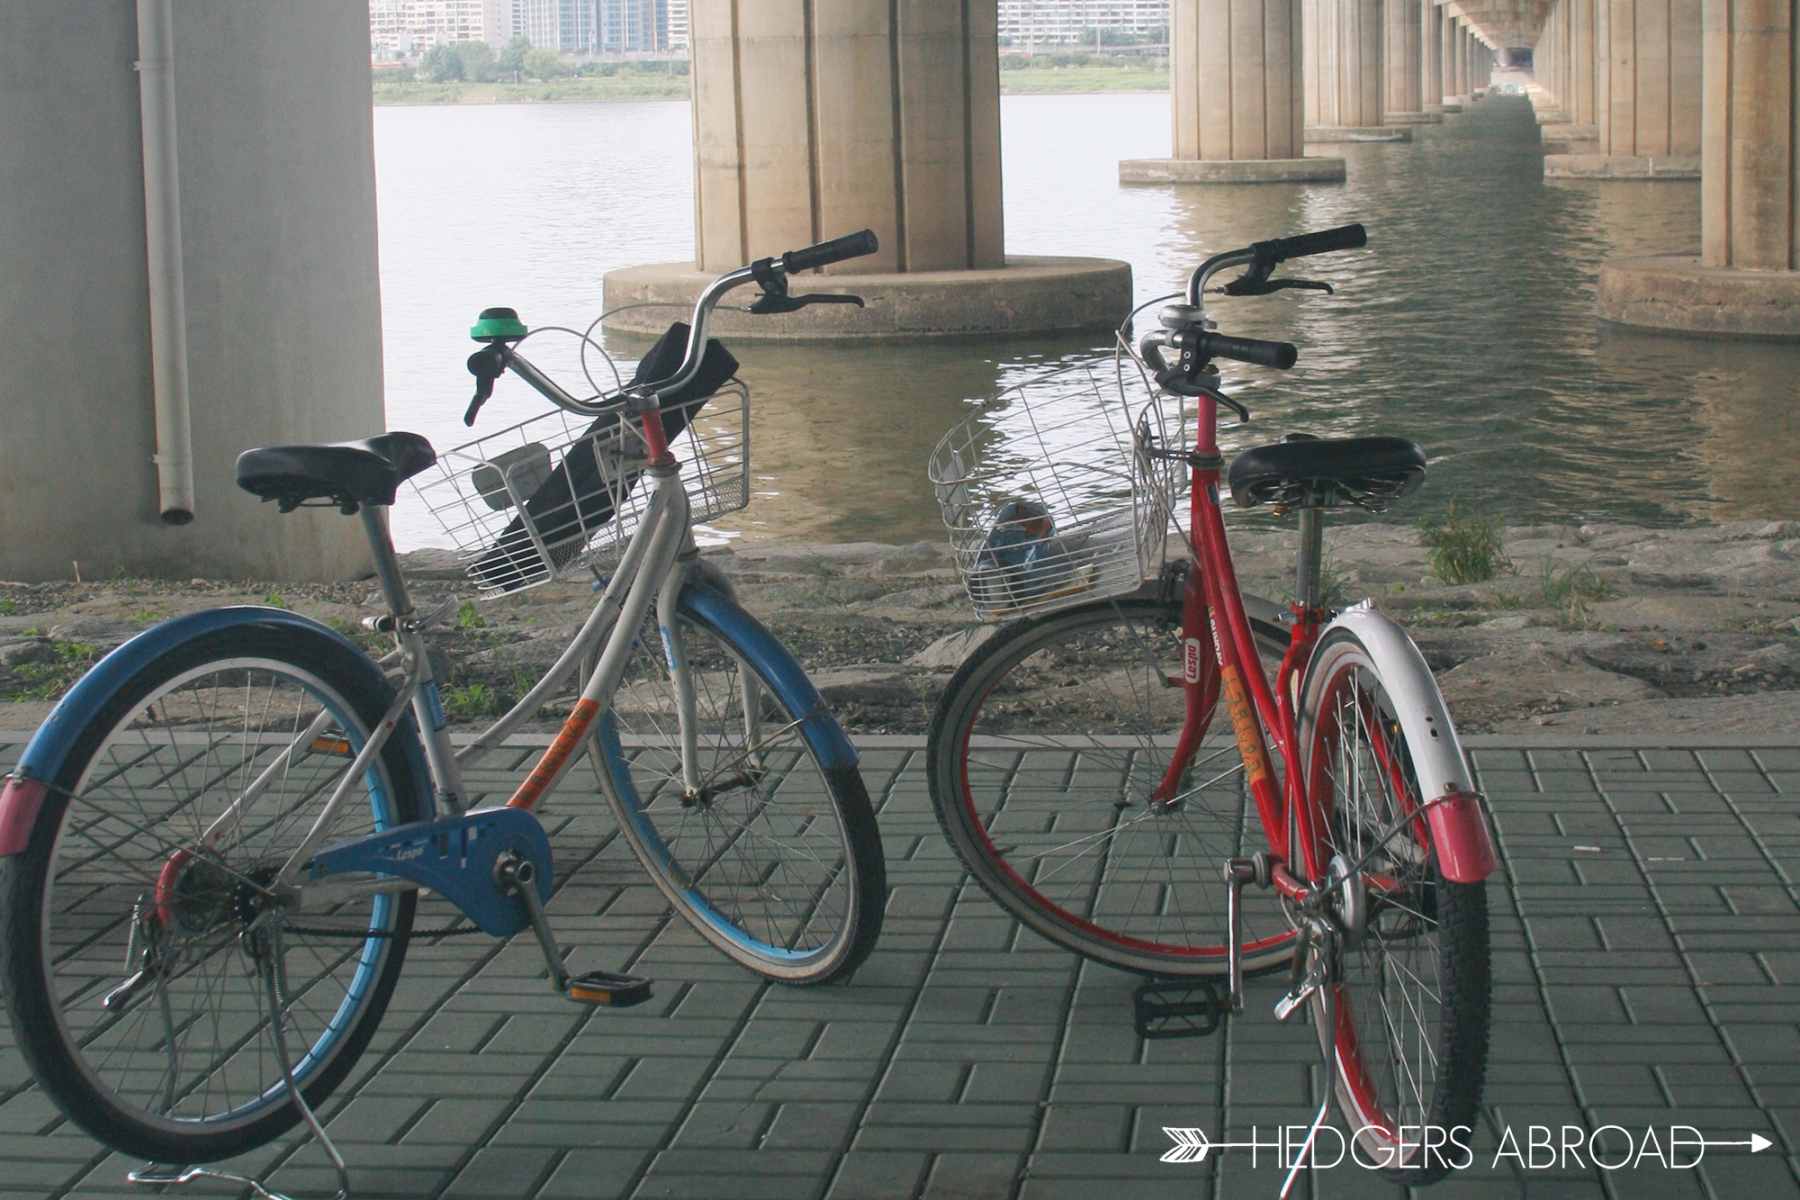 Top things to do on the Han River // SEOUL